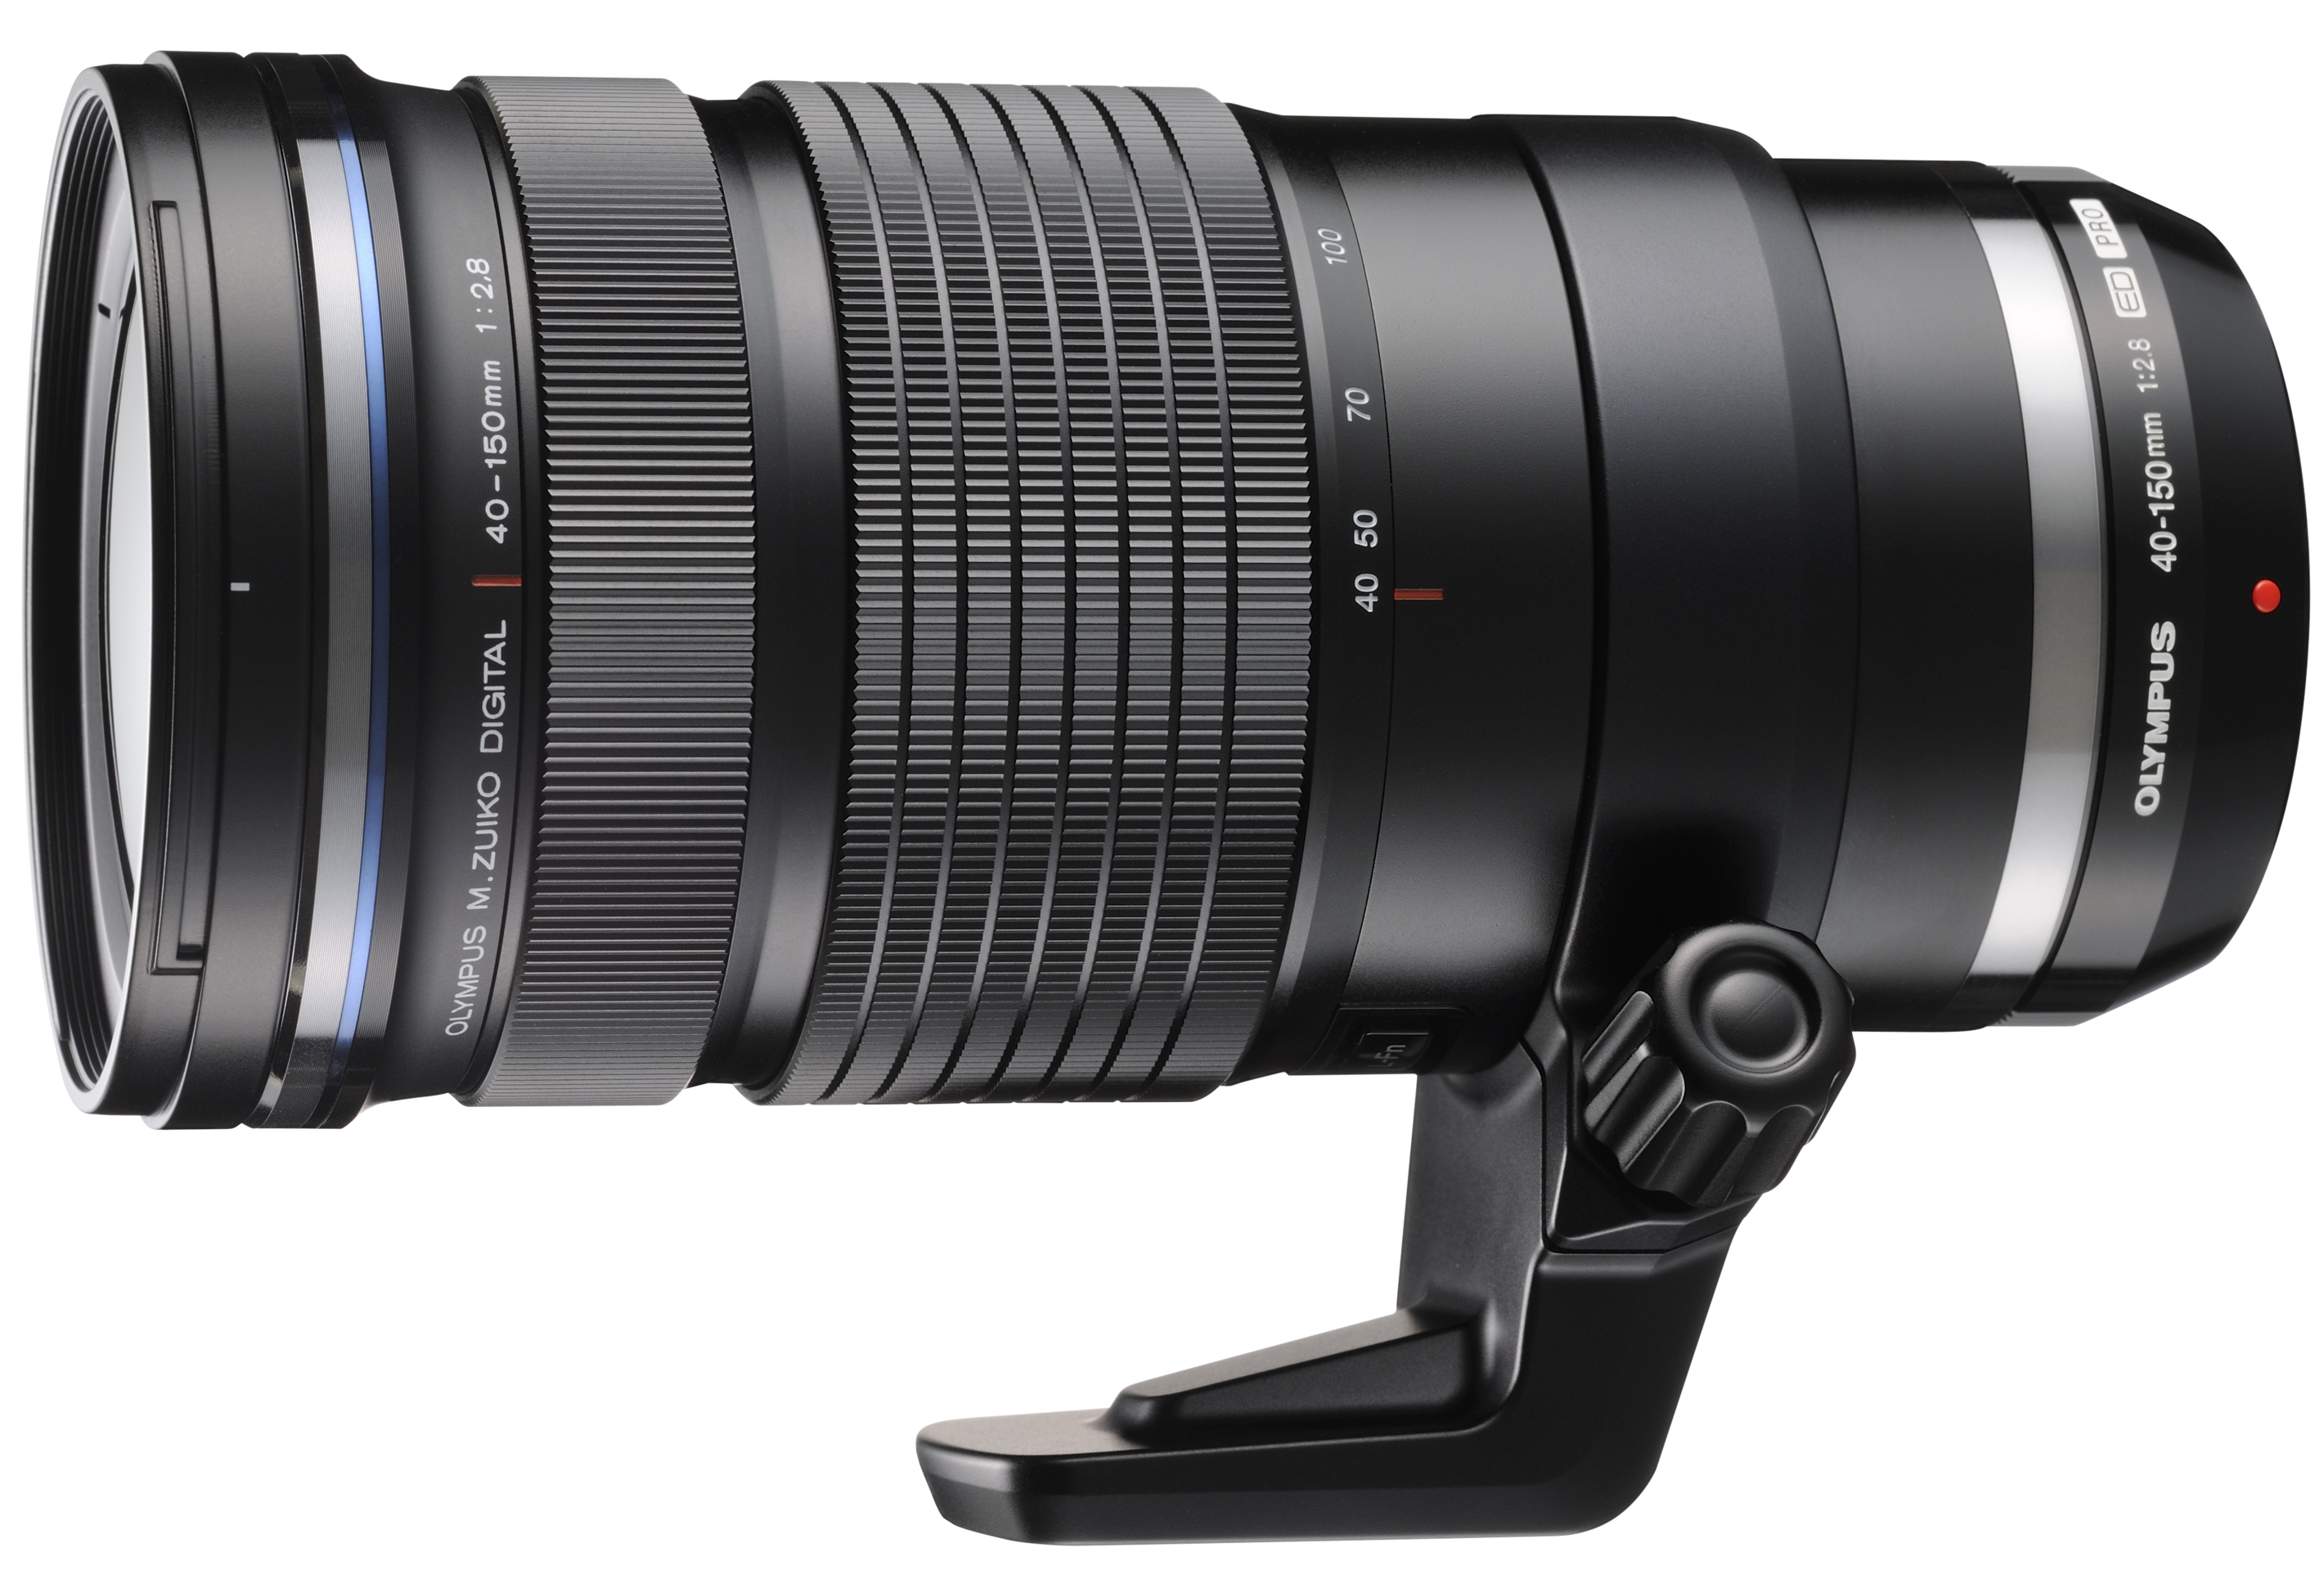 Olympus M.Zuiko PRO 40-150mm f/2.8 Lens to be released in late 2014